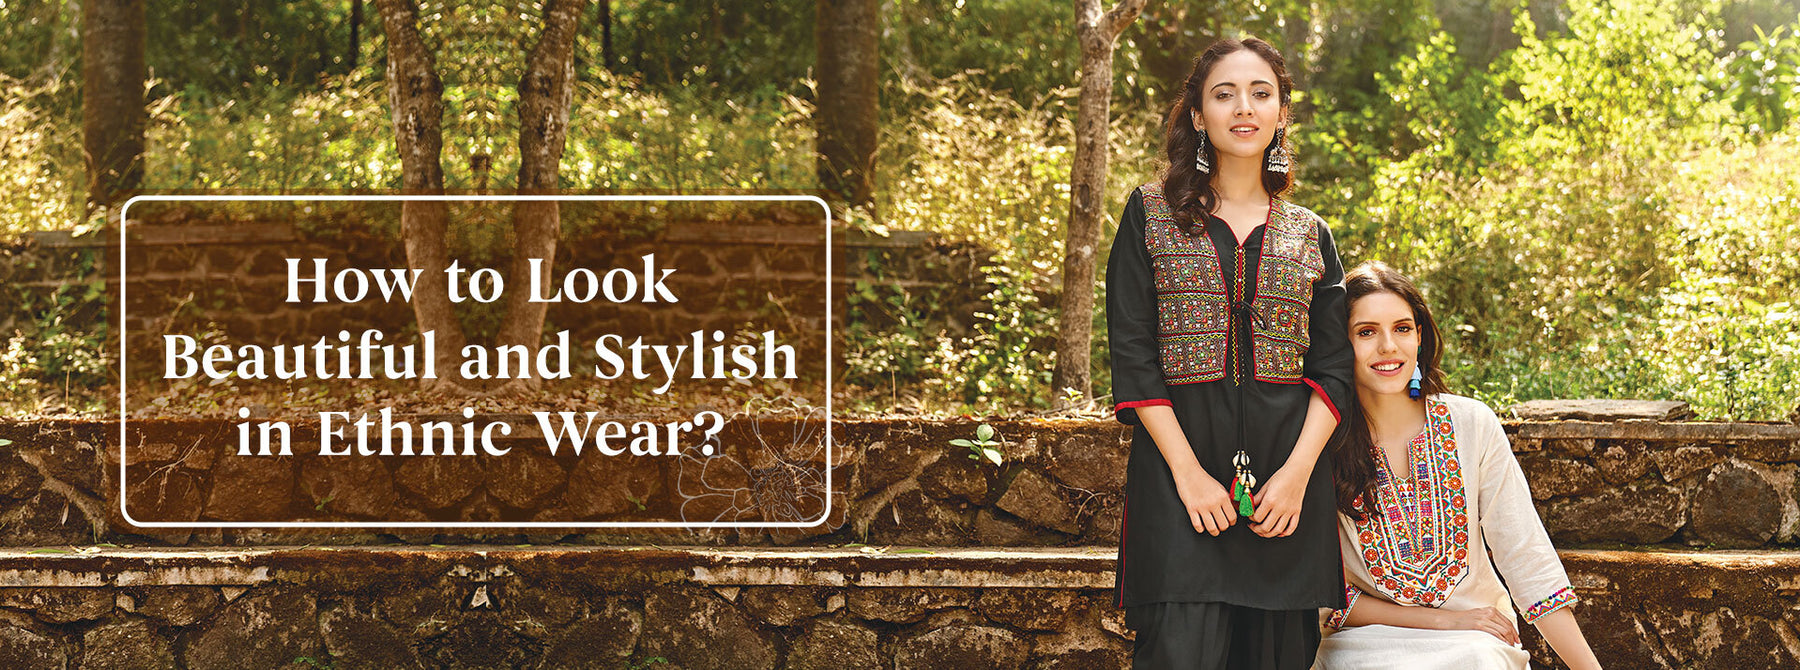 How to Look Beautiful and Stylish in Ethnic Wear?